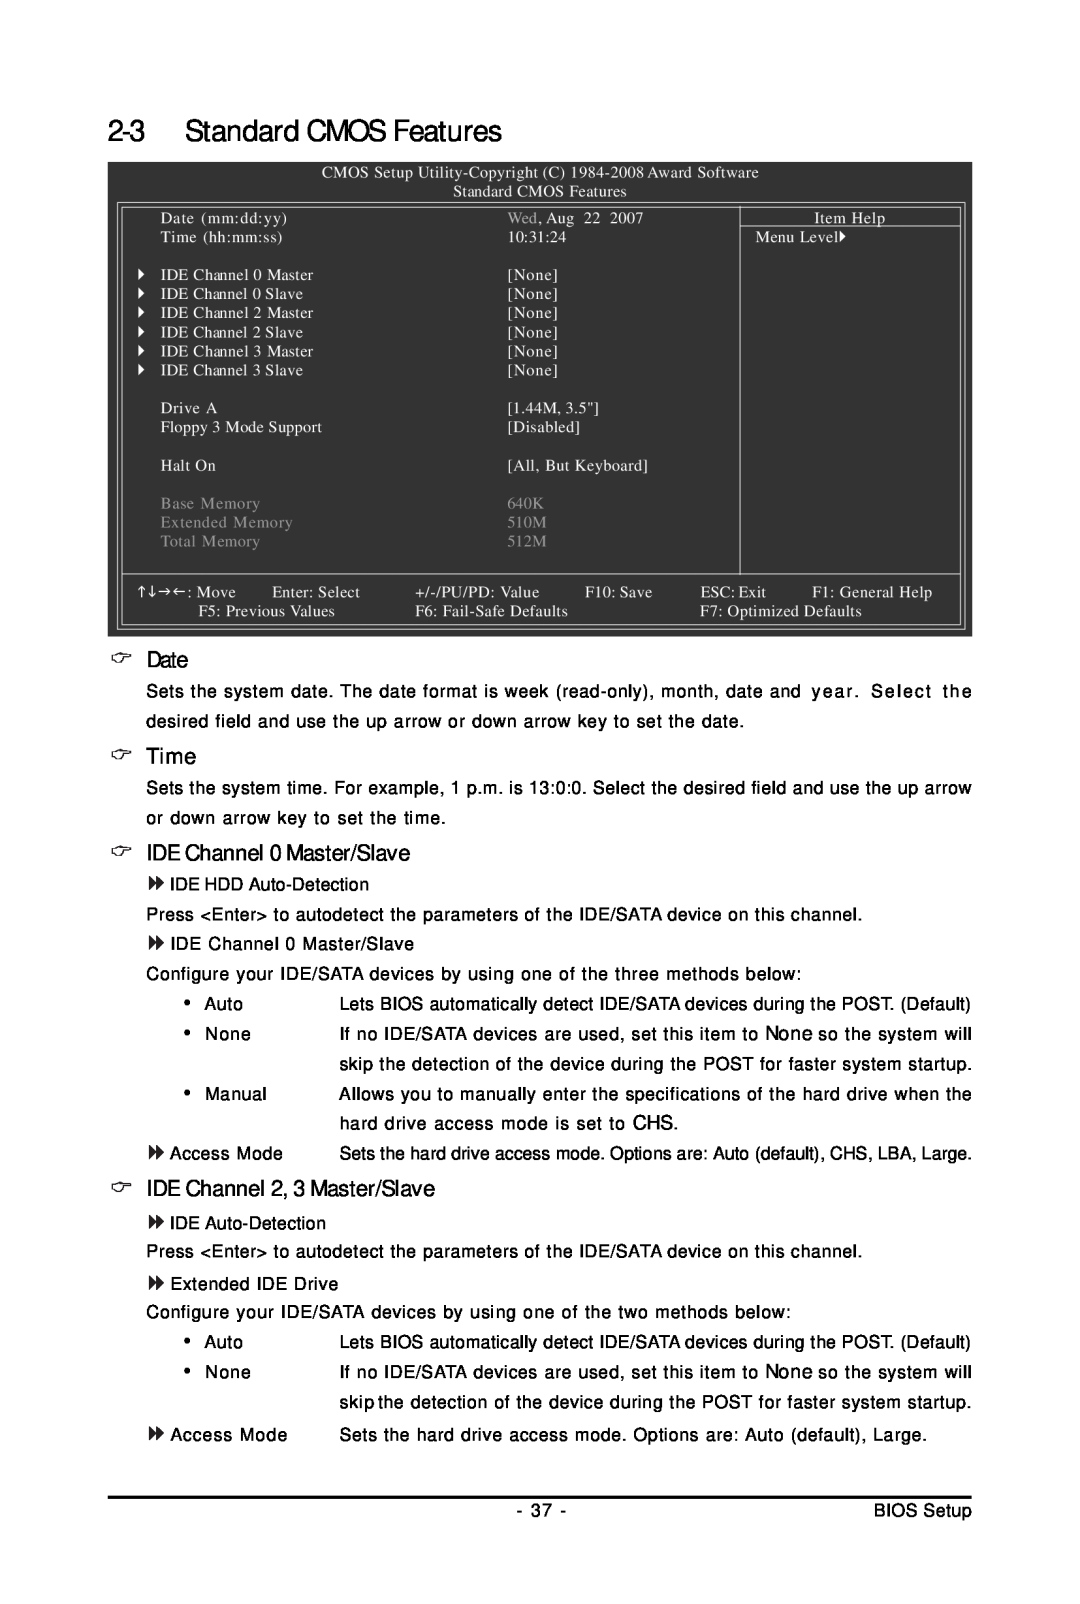 Intel GA-G31M-S2C user manual Standard CMOS Features, Date, Time, IDE Channel 0 Master/Slave, IDE Channel 2, 3 Master/Slave 